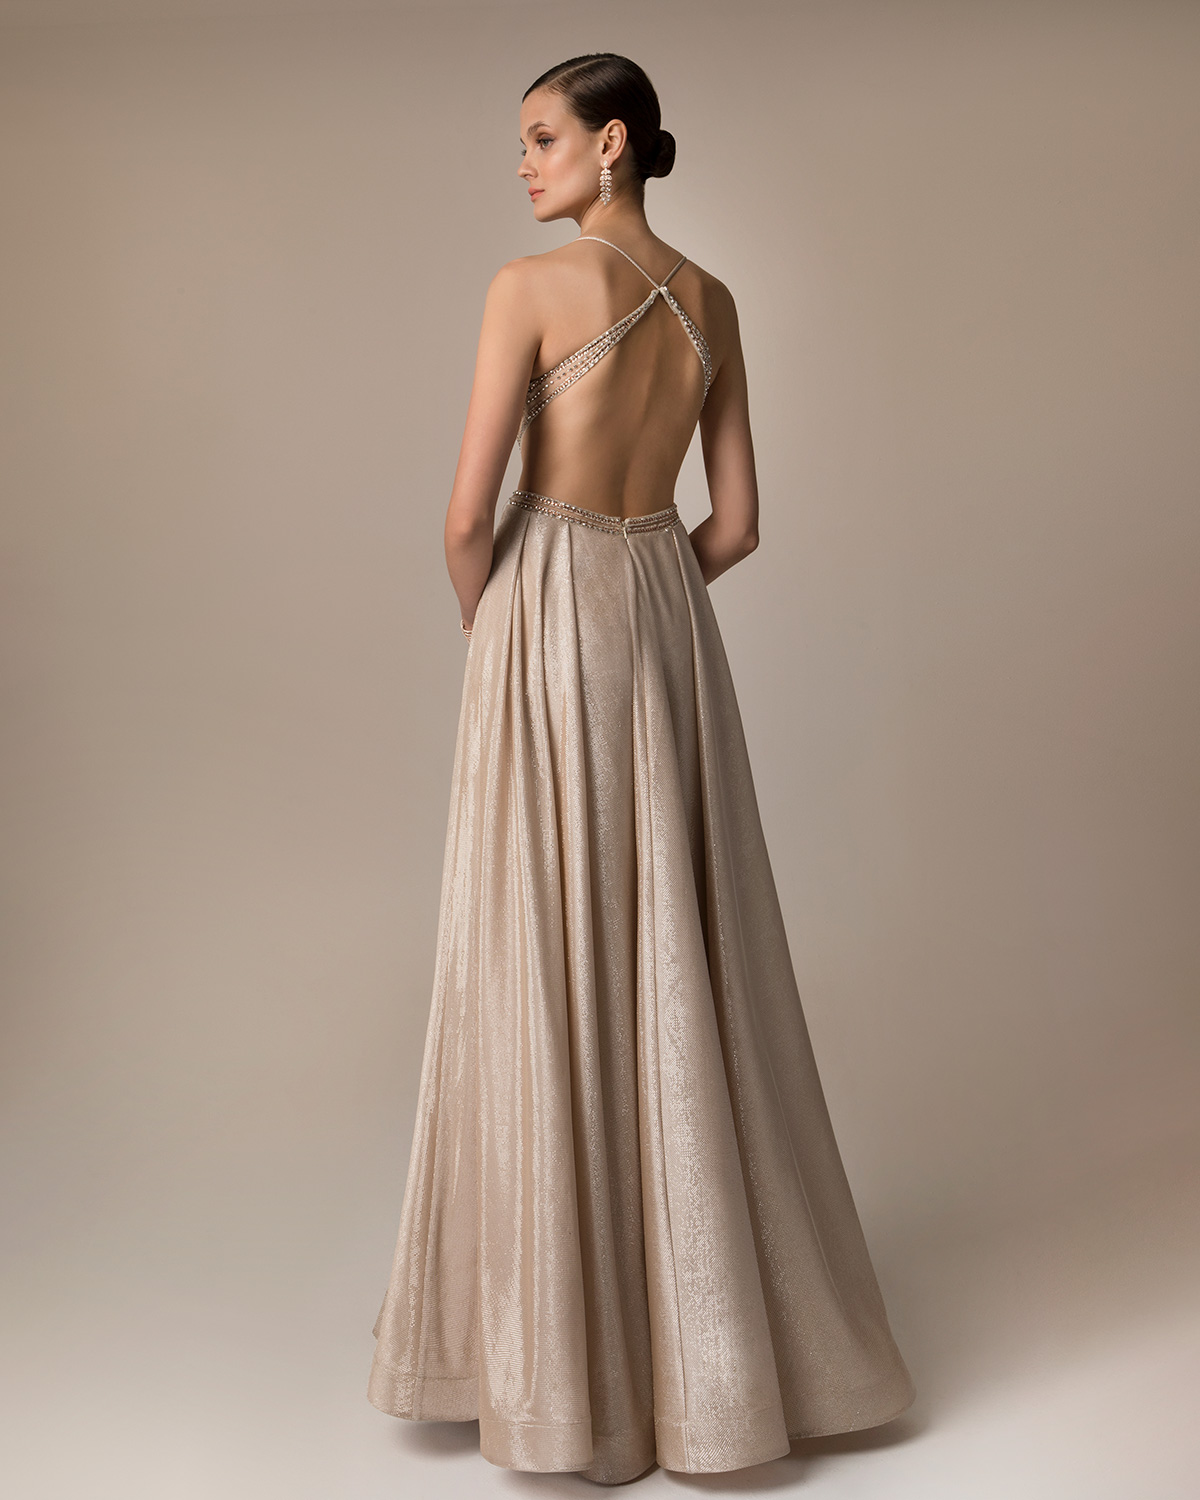 Вечерние платья / Long evening dress with shining fabric and beaded top and straps